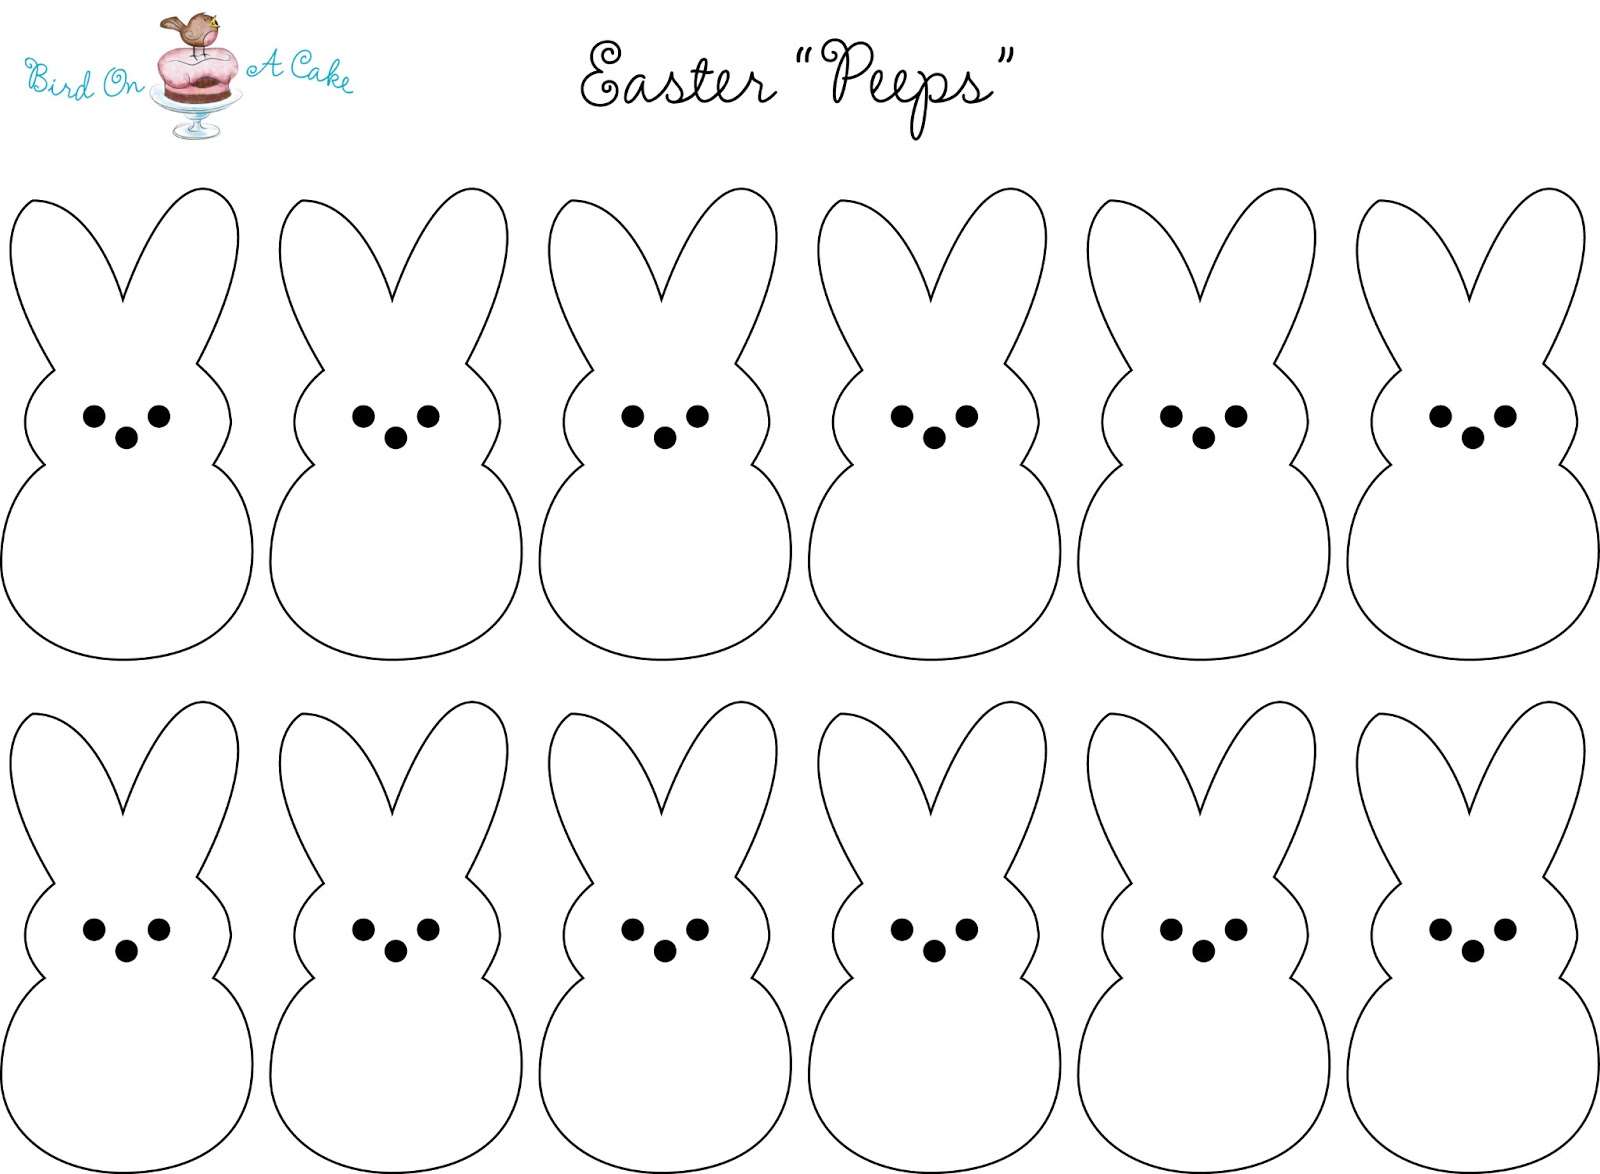 peeps clipart black and white